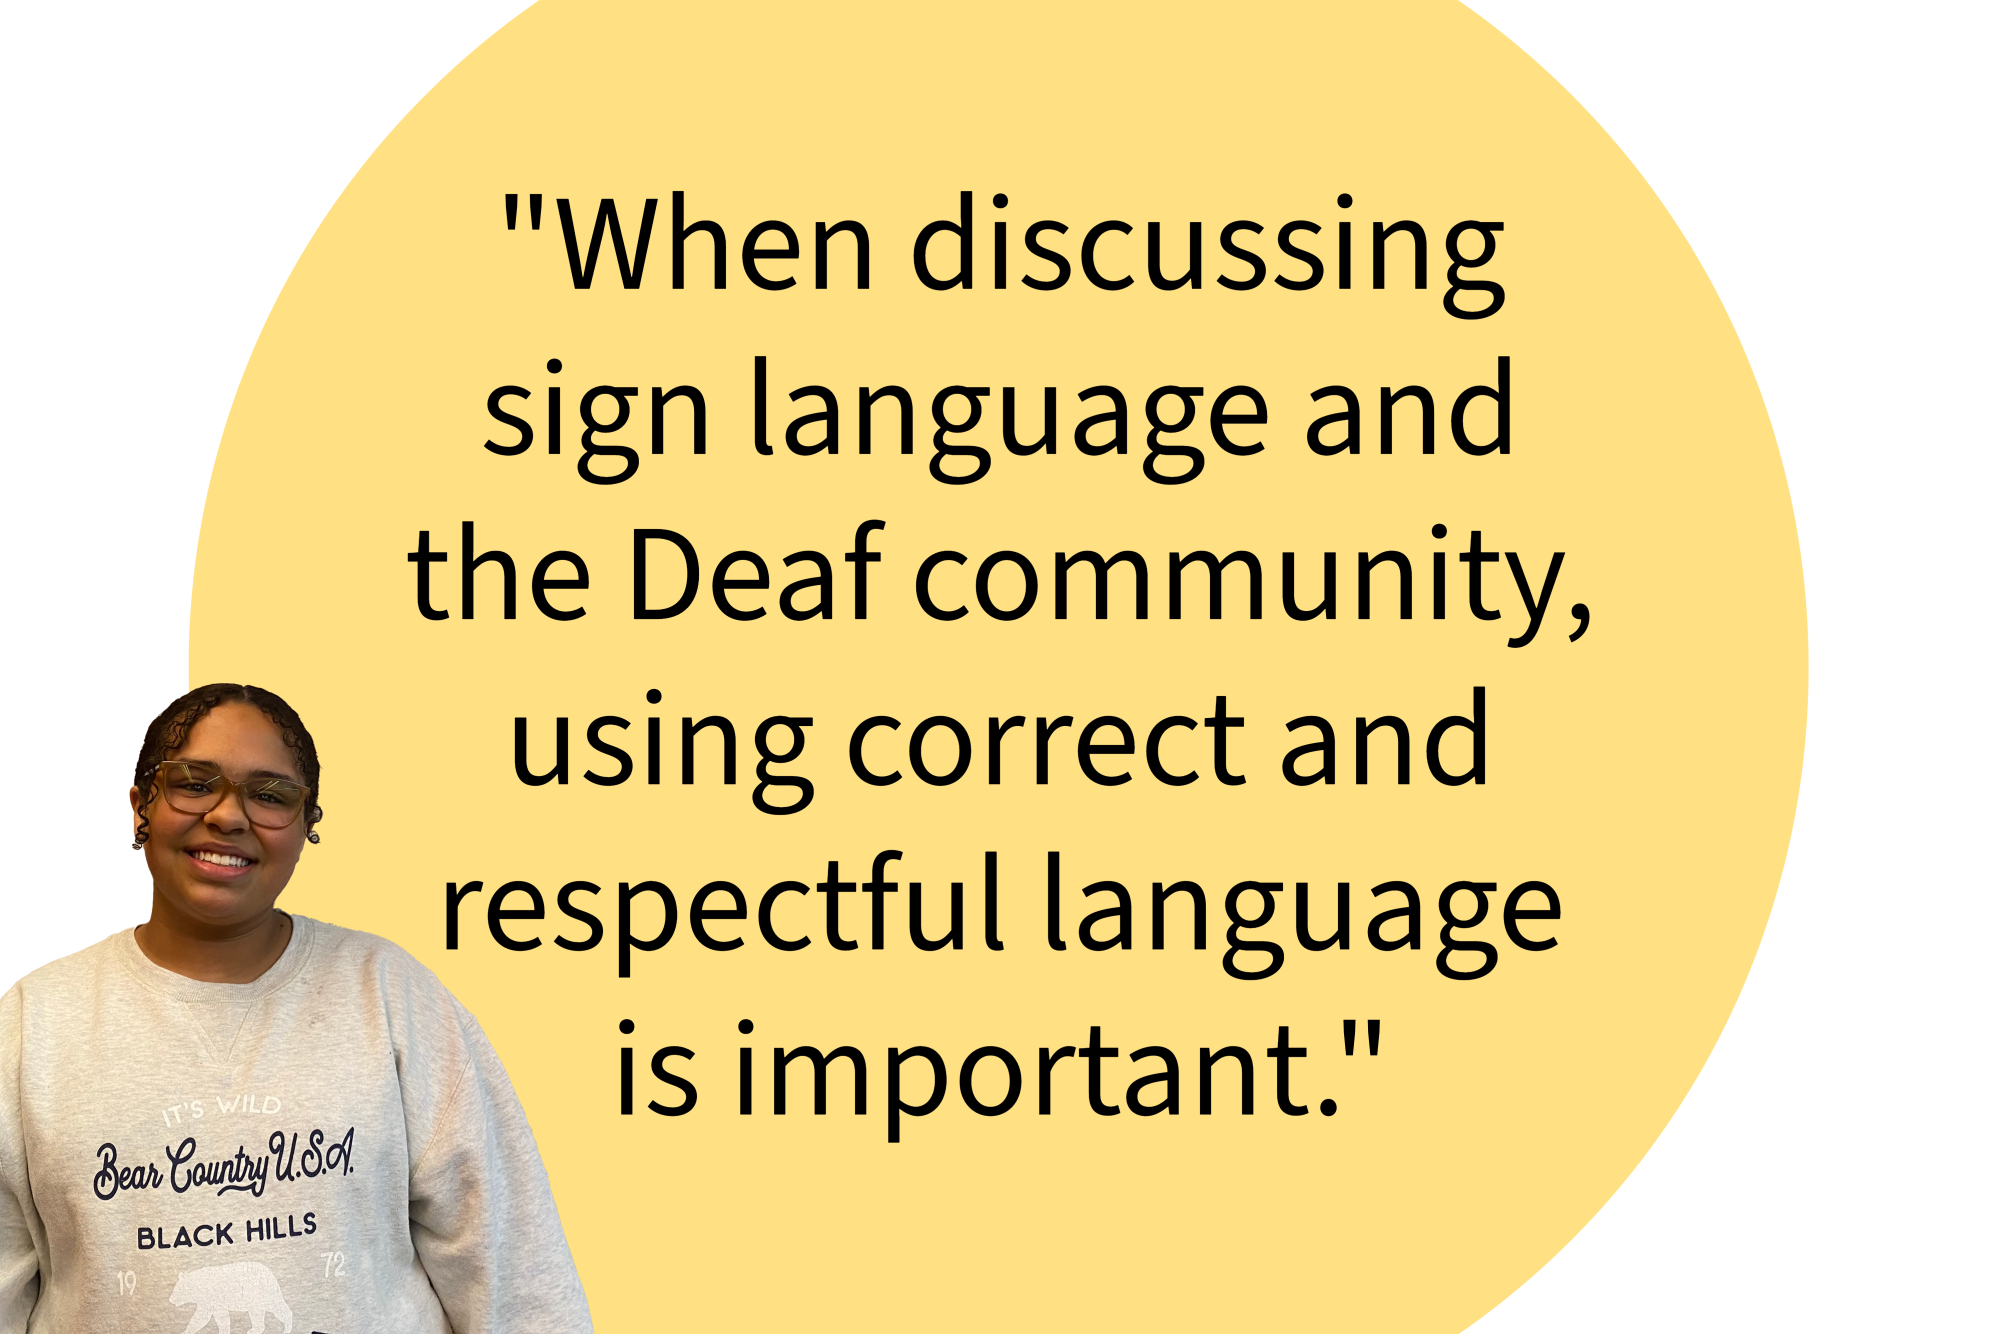 Deaf, not disabled: it matters